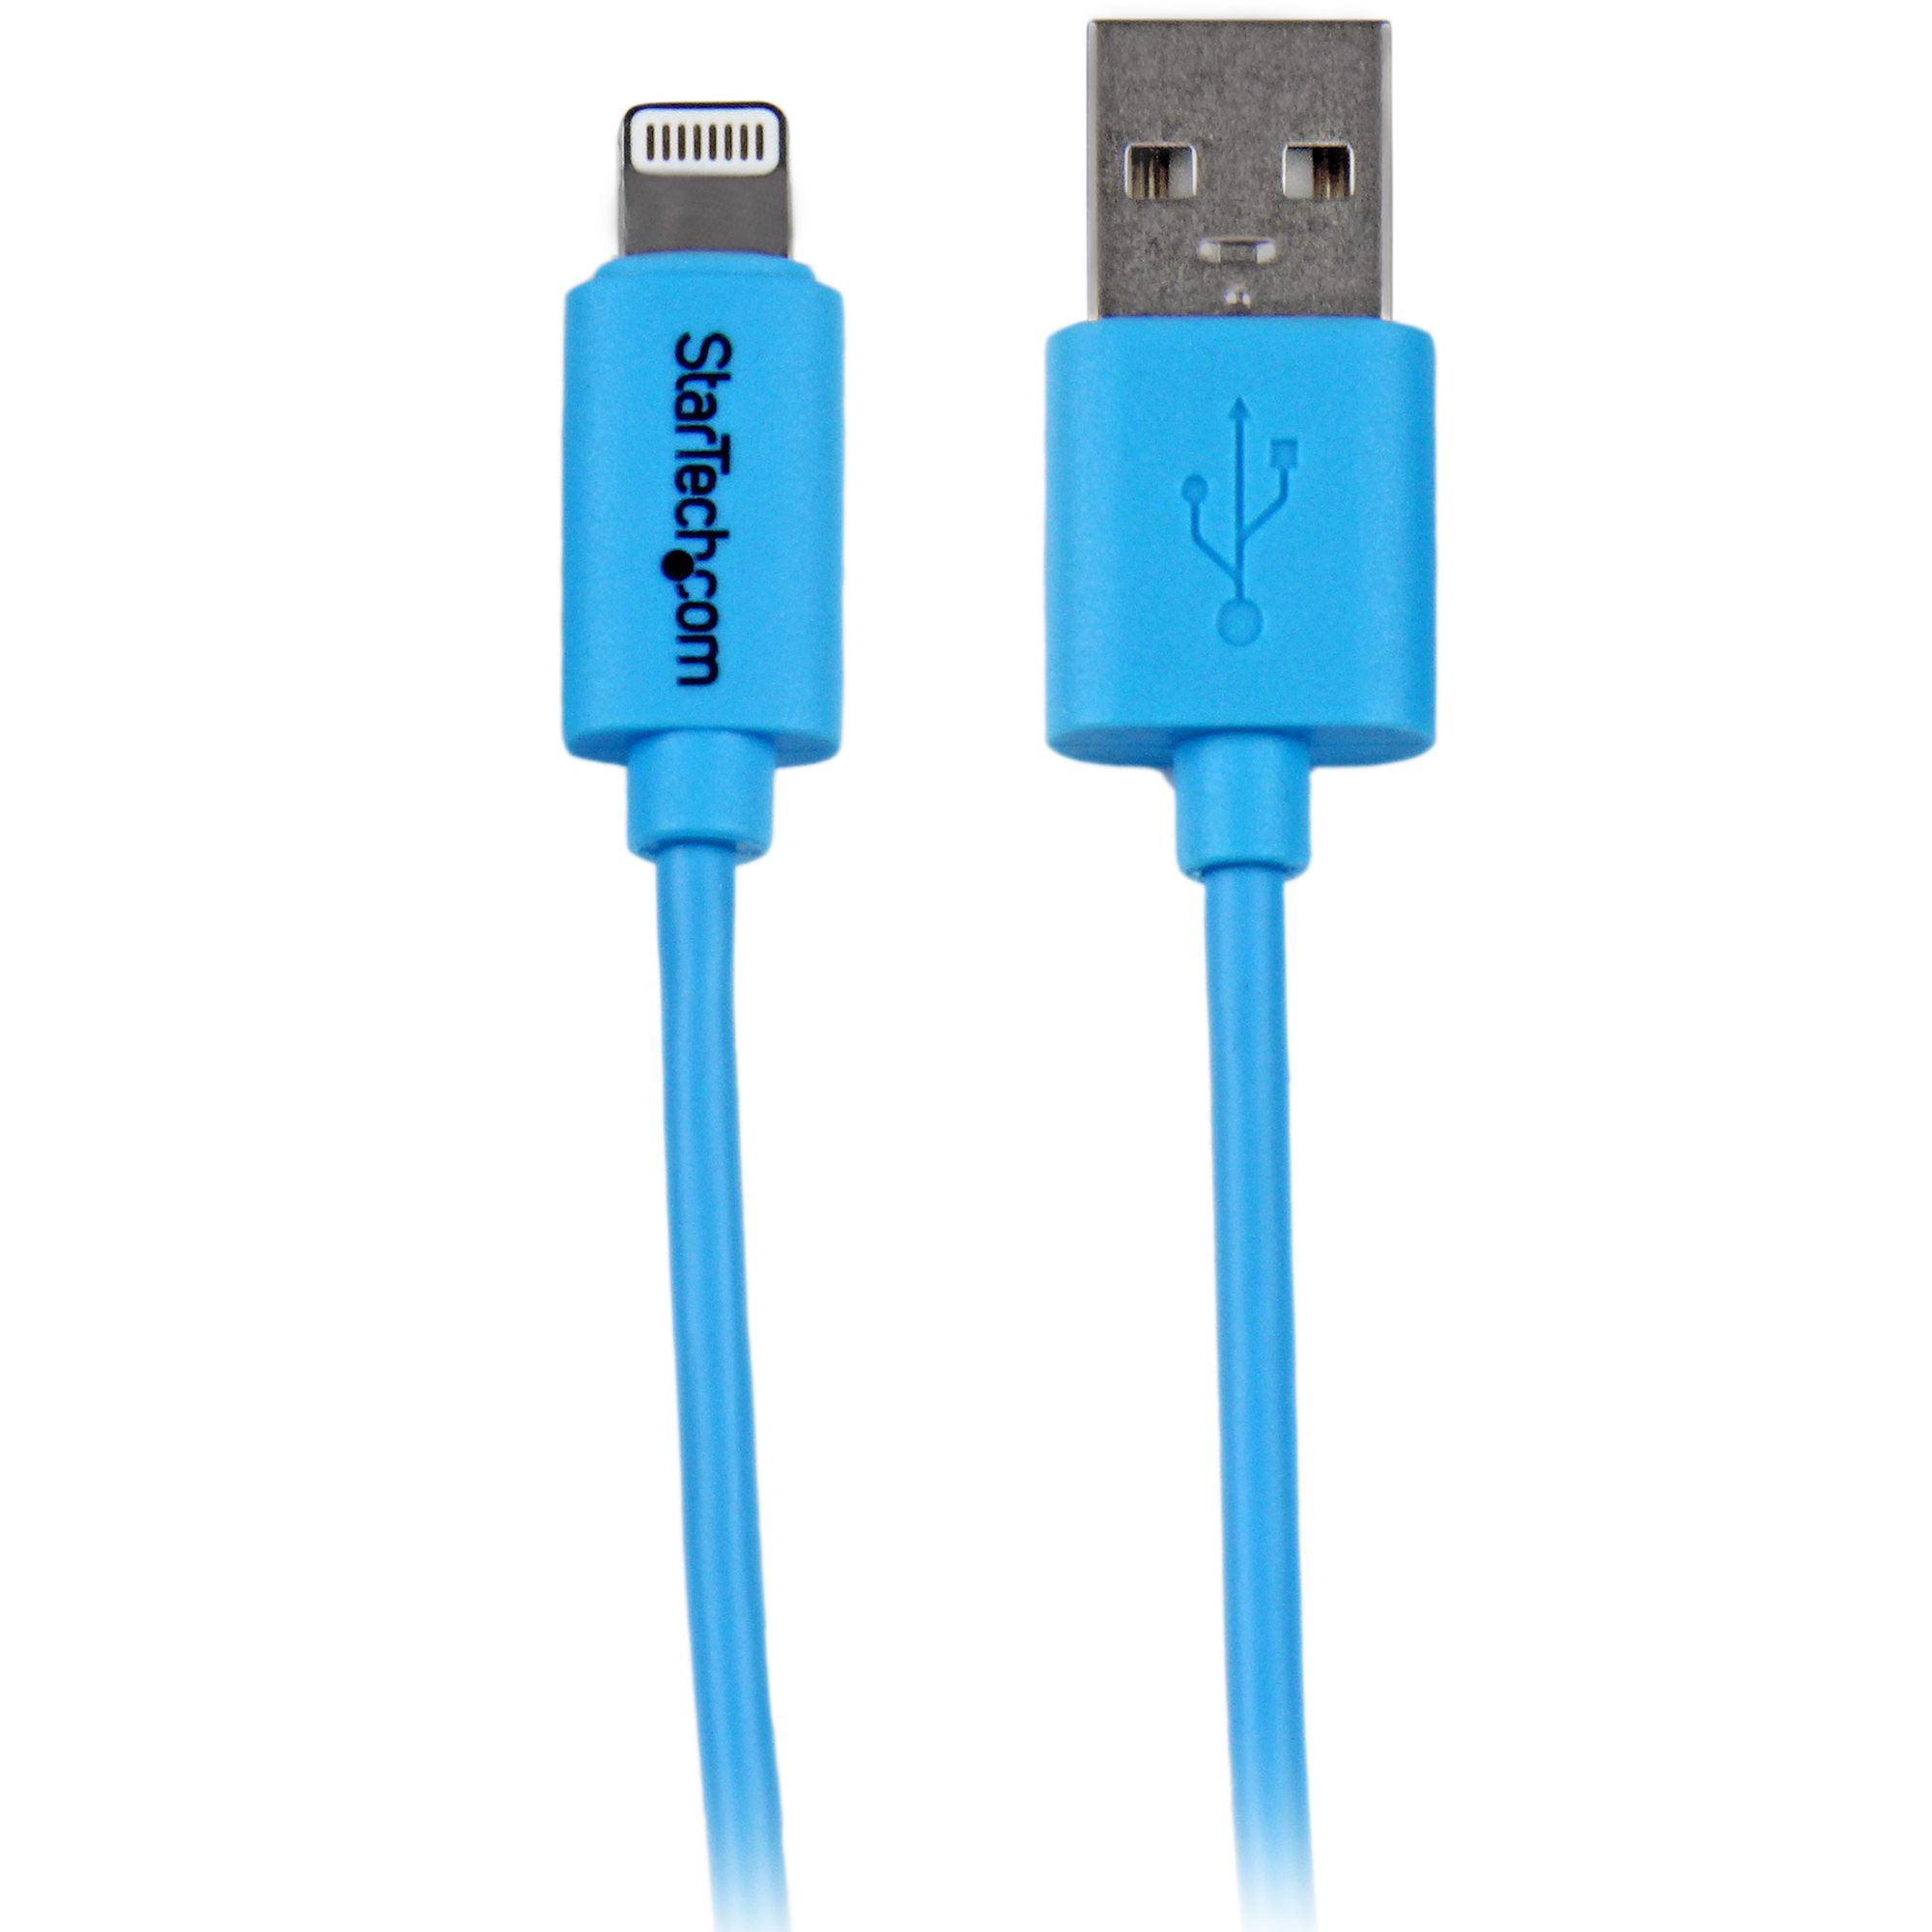 1m Blue 8-pin Lightning to USB Cable - Lightning Cables   Europe